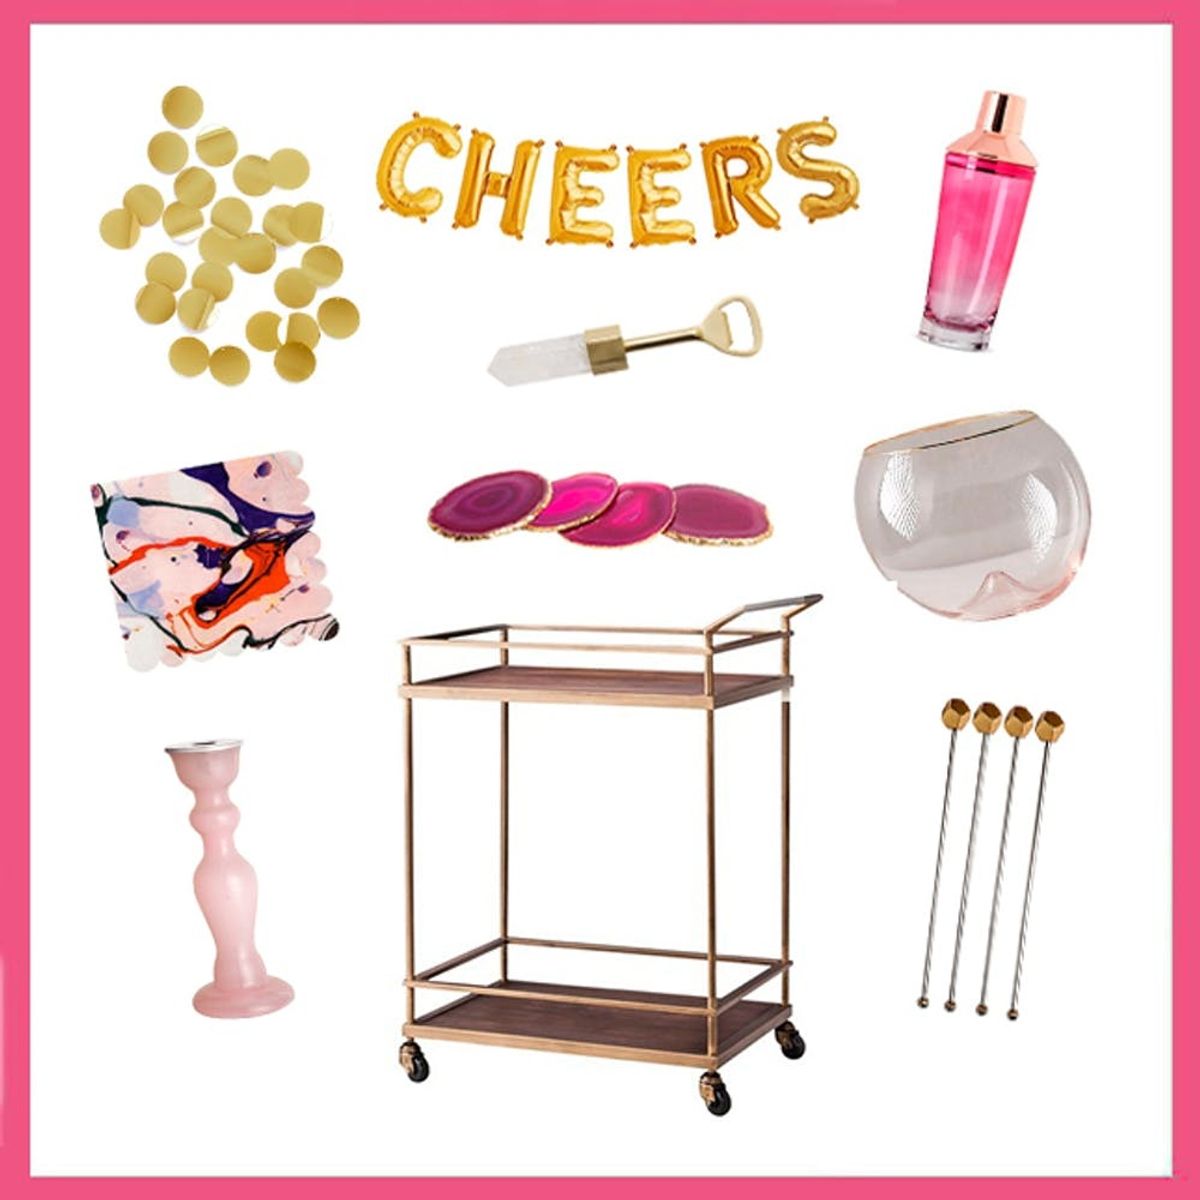 3 Ways to Decorate Your Bar Cart for NYE